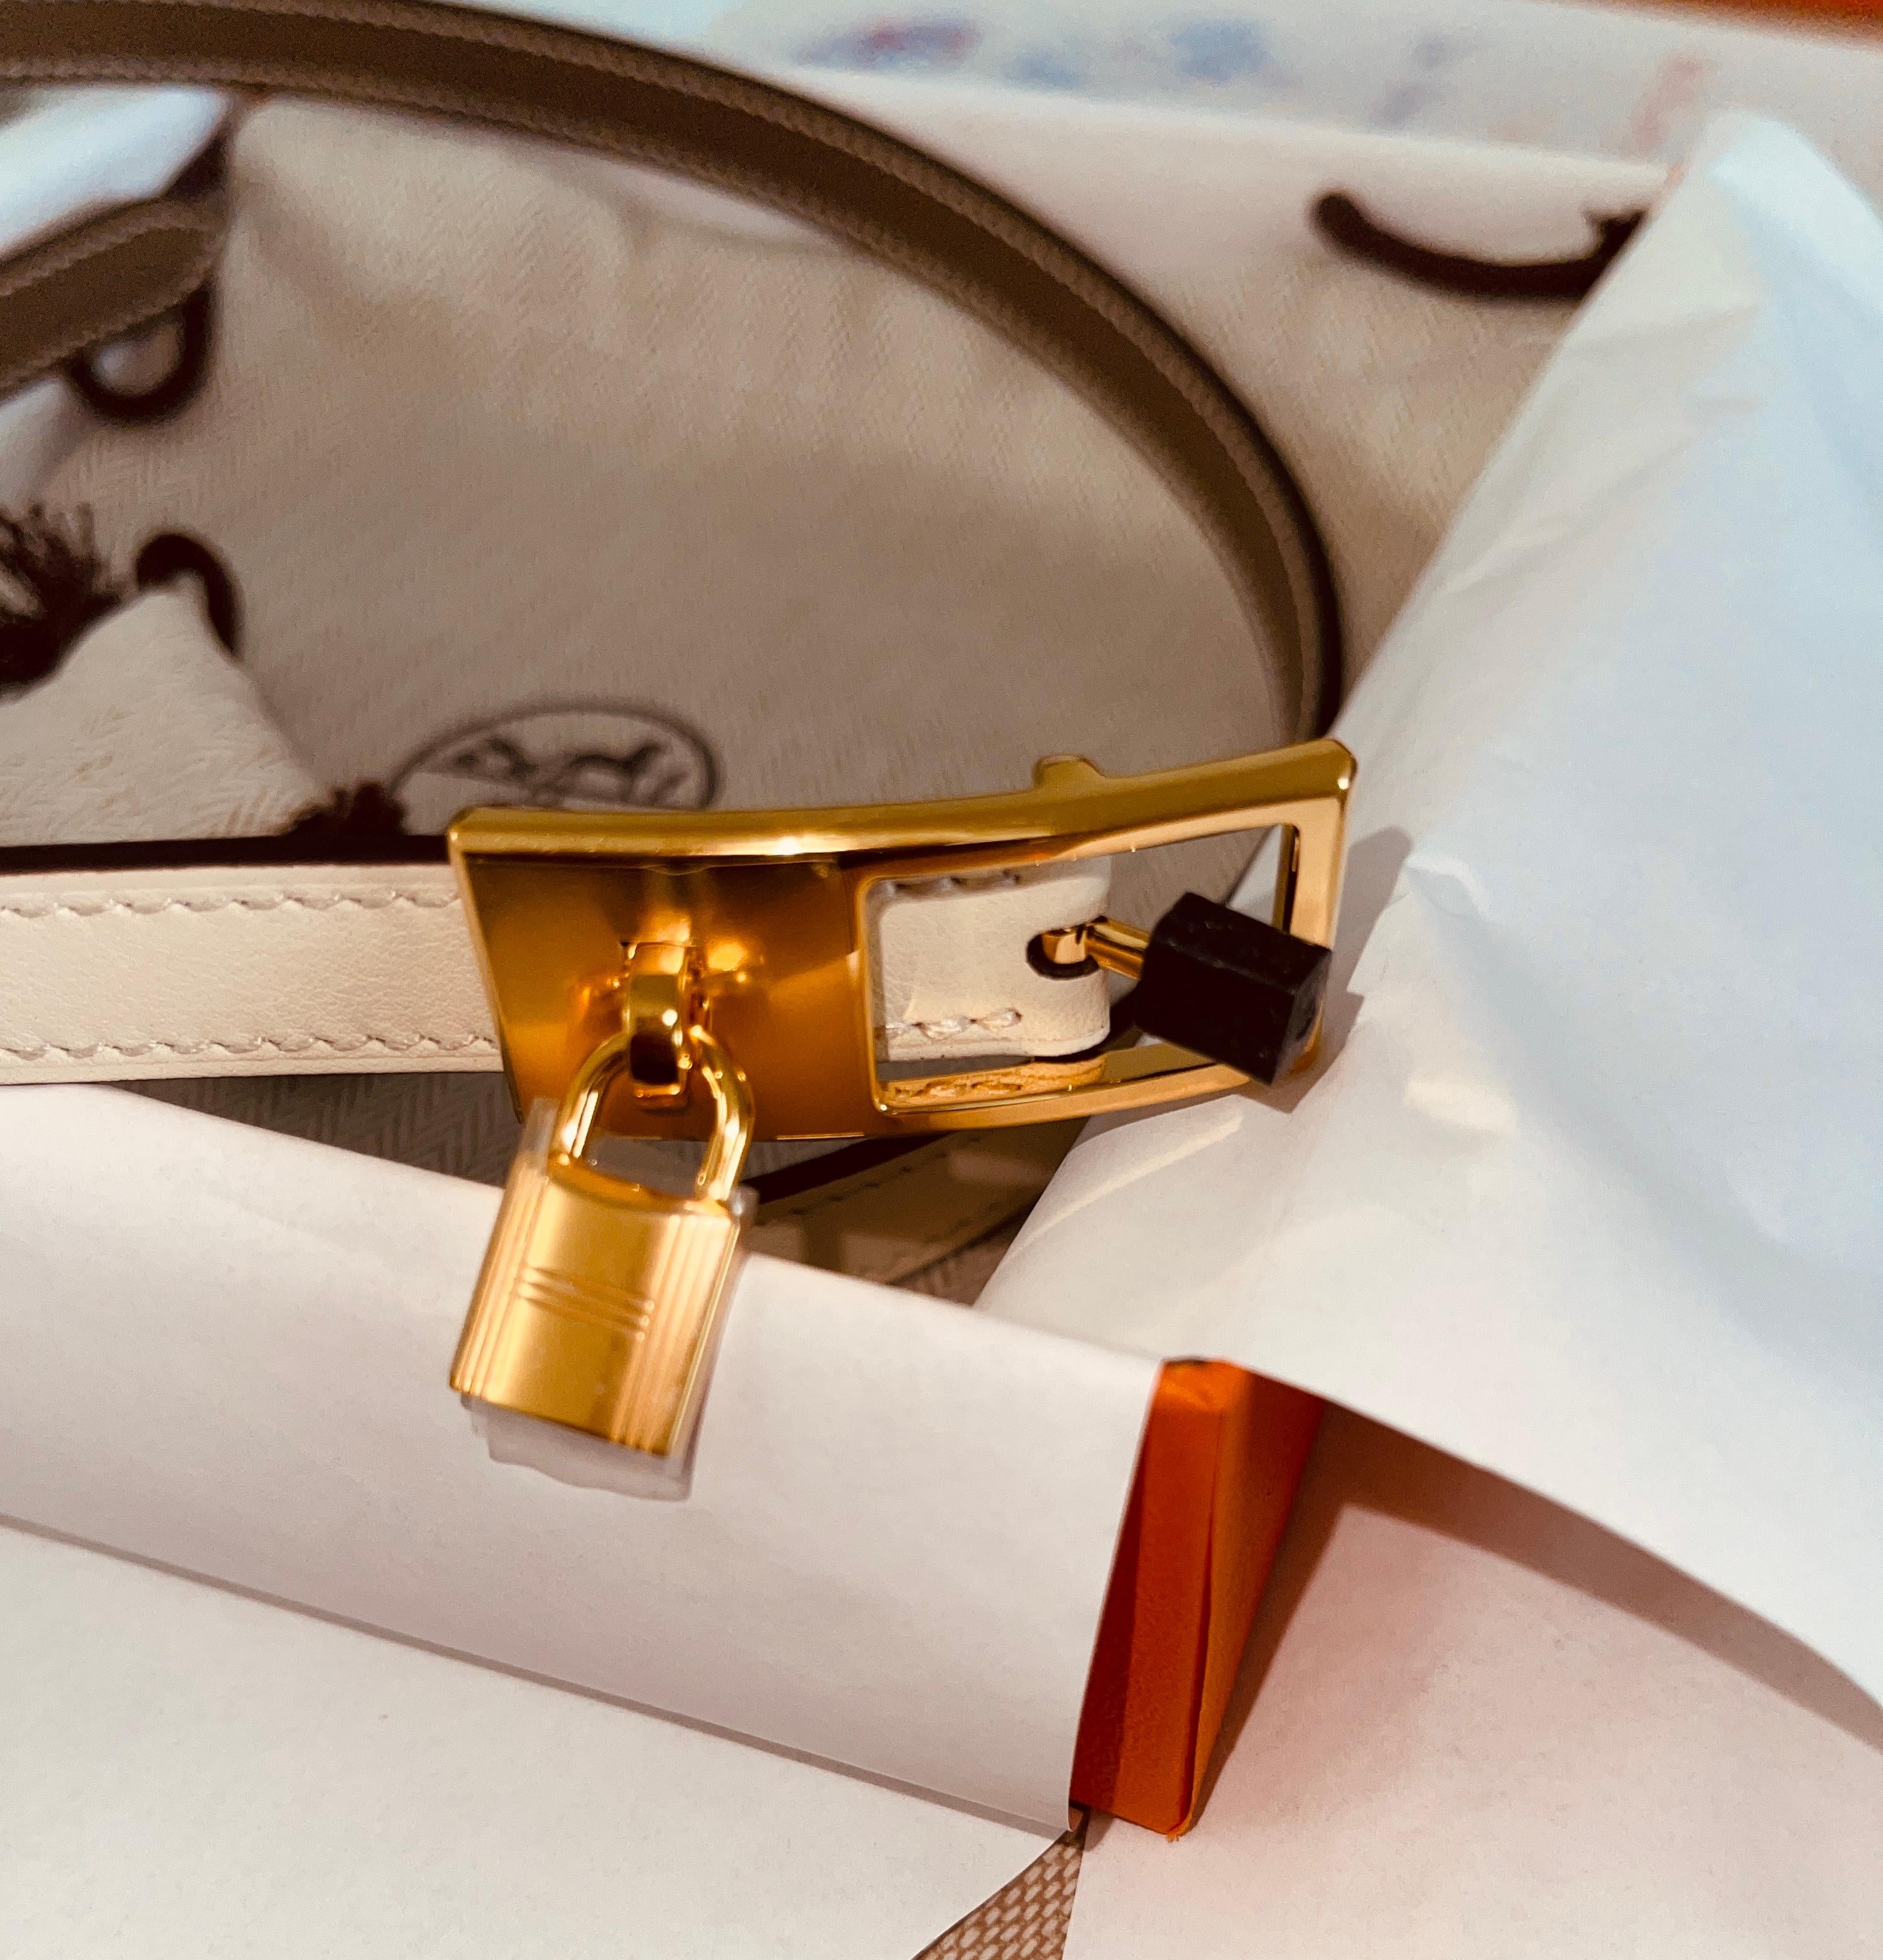 Hermes
Hermes is a luxury brand known for its high-quality accessories, especially their leather goods including belts
Lucky 15 Reversible Belt
Has the iconic Hermes lock in gold plate hanging from the buckle, which makes it distinguishable as